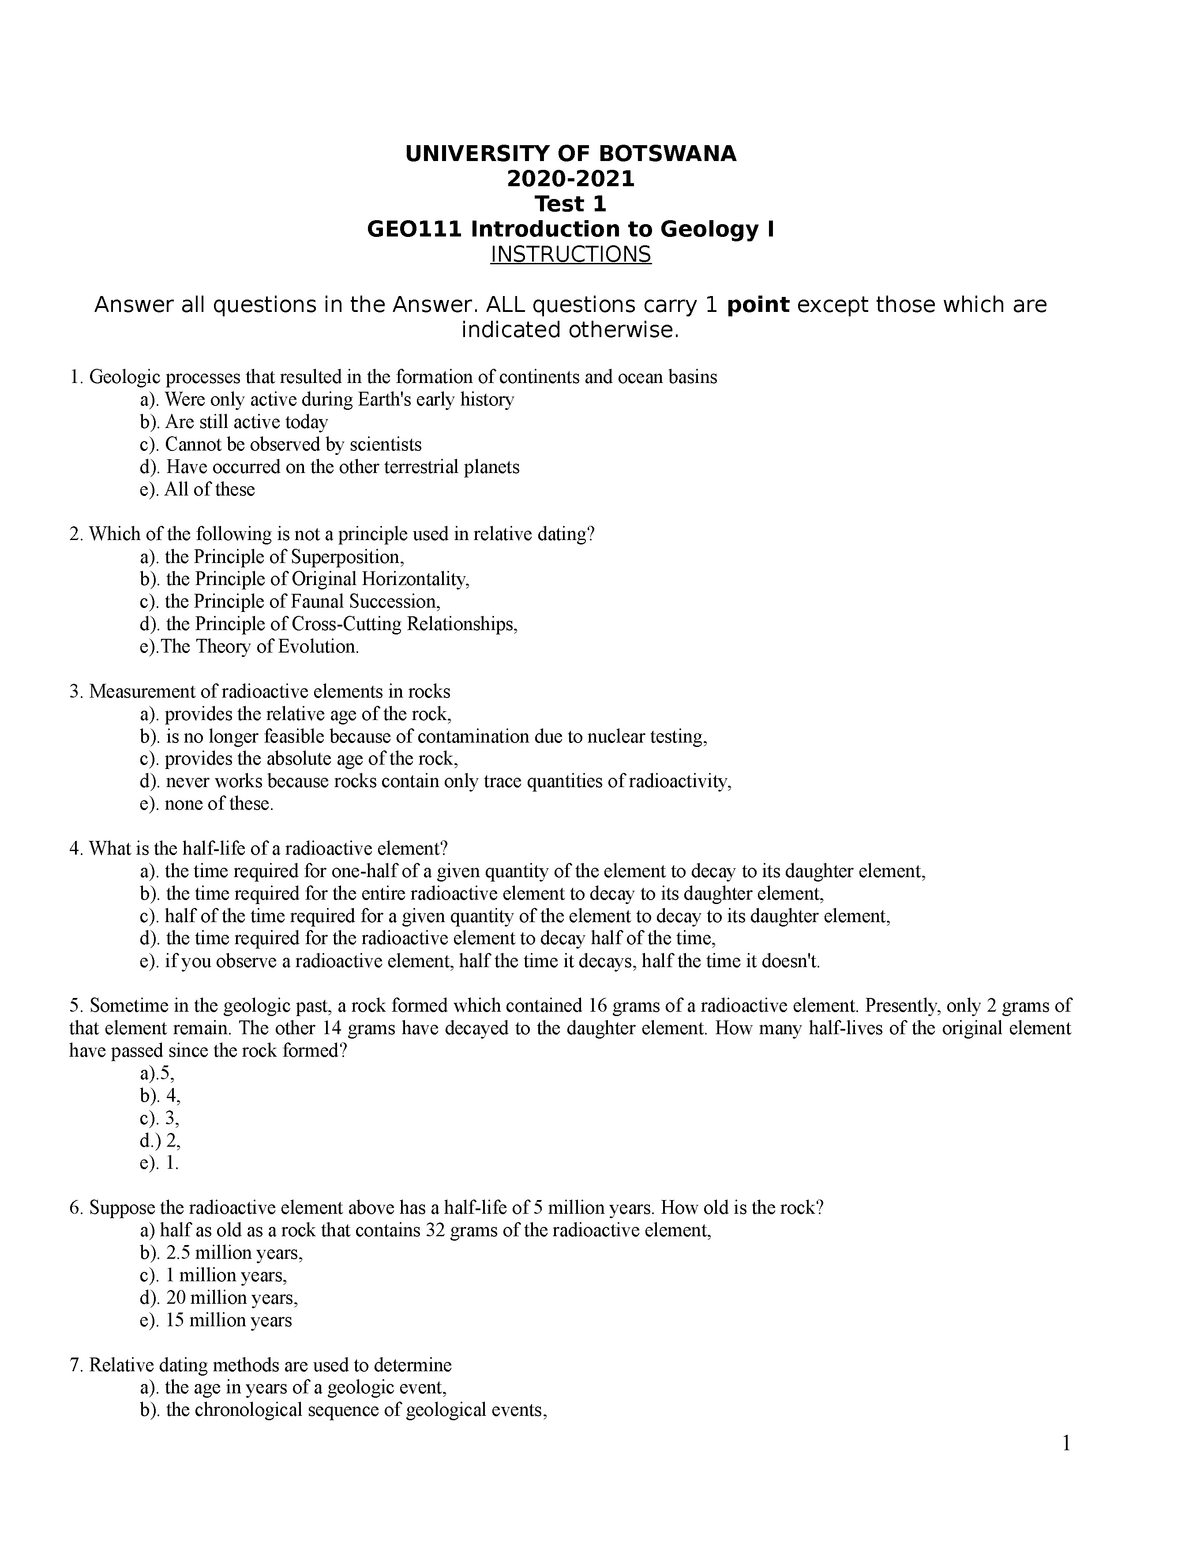 Relative dating worksheet principles of geology answers